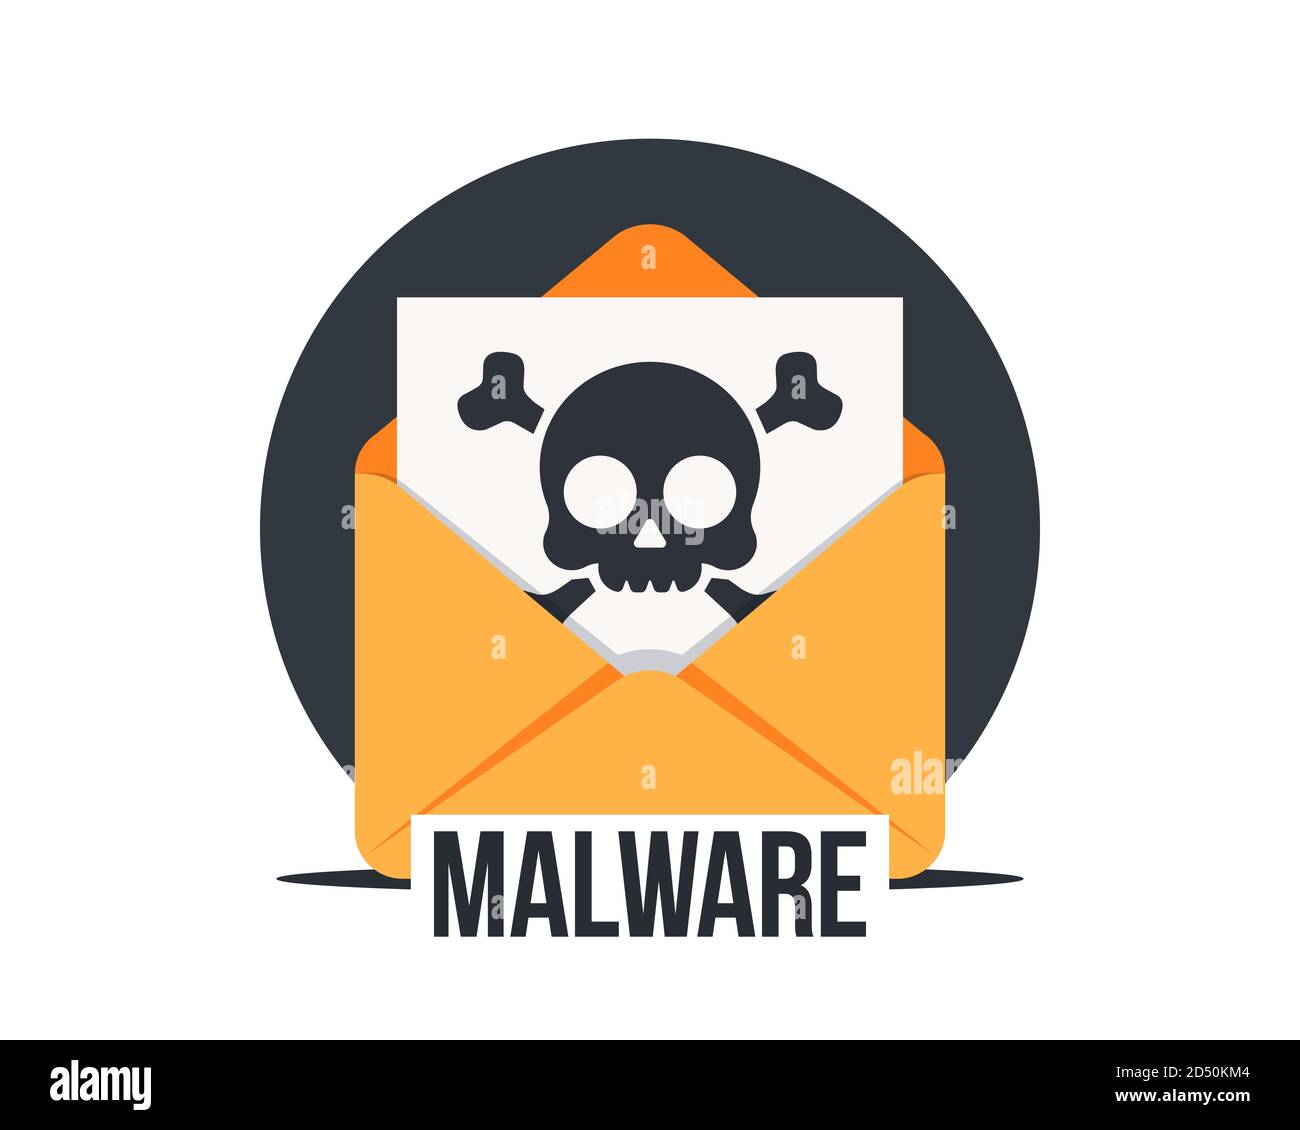 Email with malware, vector icon. Virus, malware, email fraud, e-mail spam, phishing scam, hacker attack concept. Opened mail envelope with infected fi Stock Vector